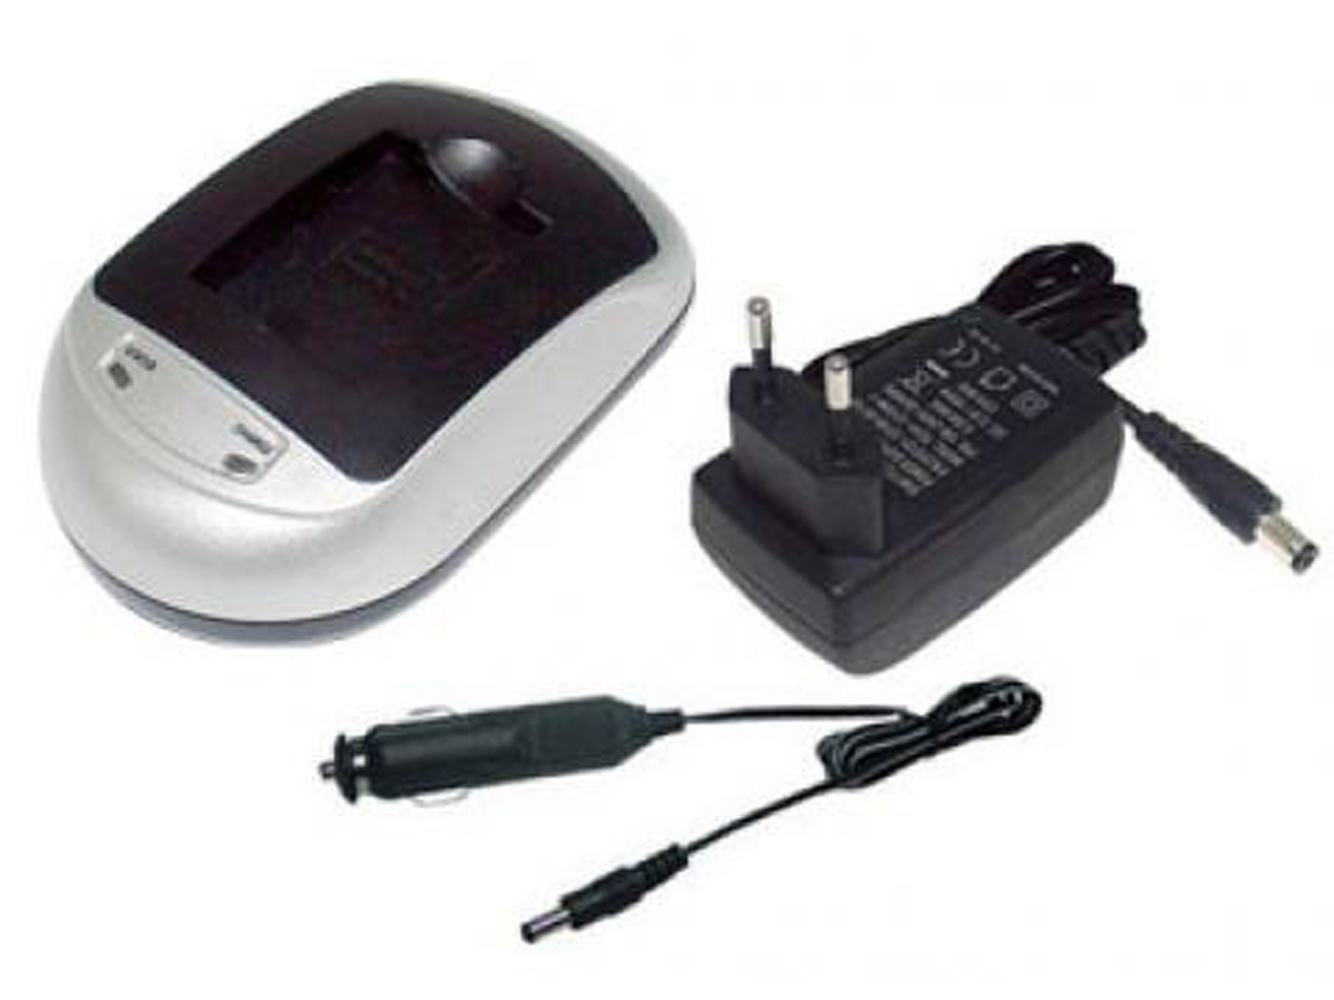 Leica Bp-dc7, Bp-dc7-e Battery Chargers For Leica V-lux 20, Leica V-lux 30 replacement